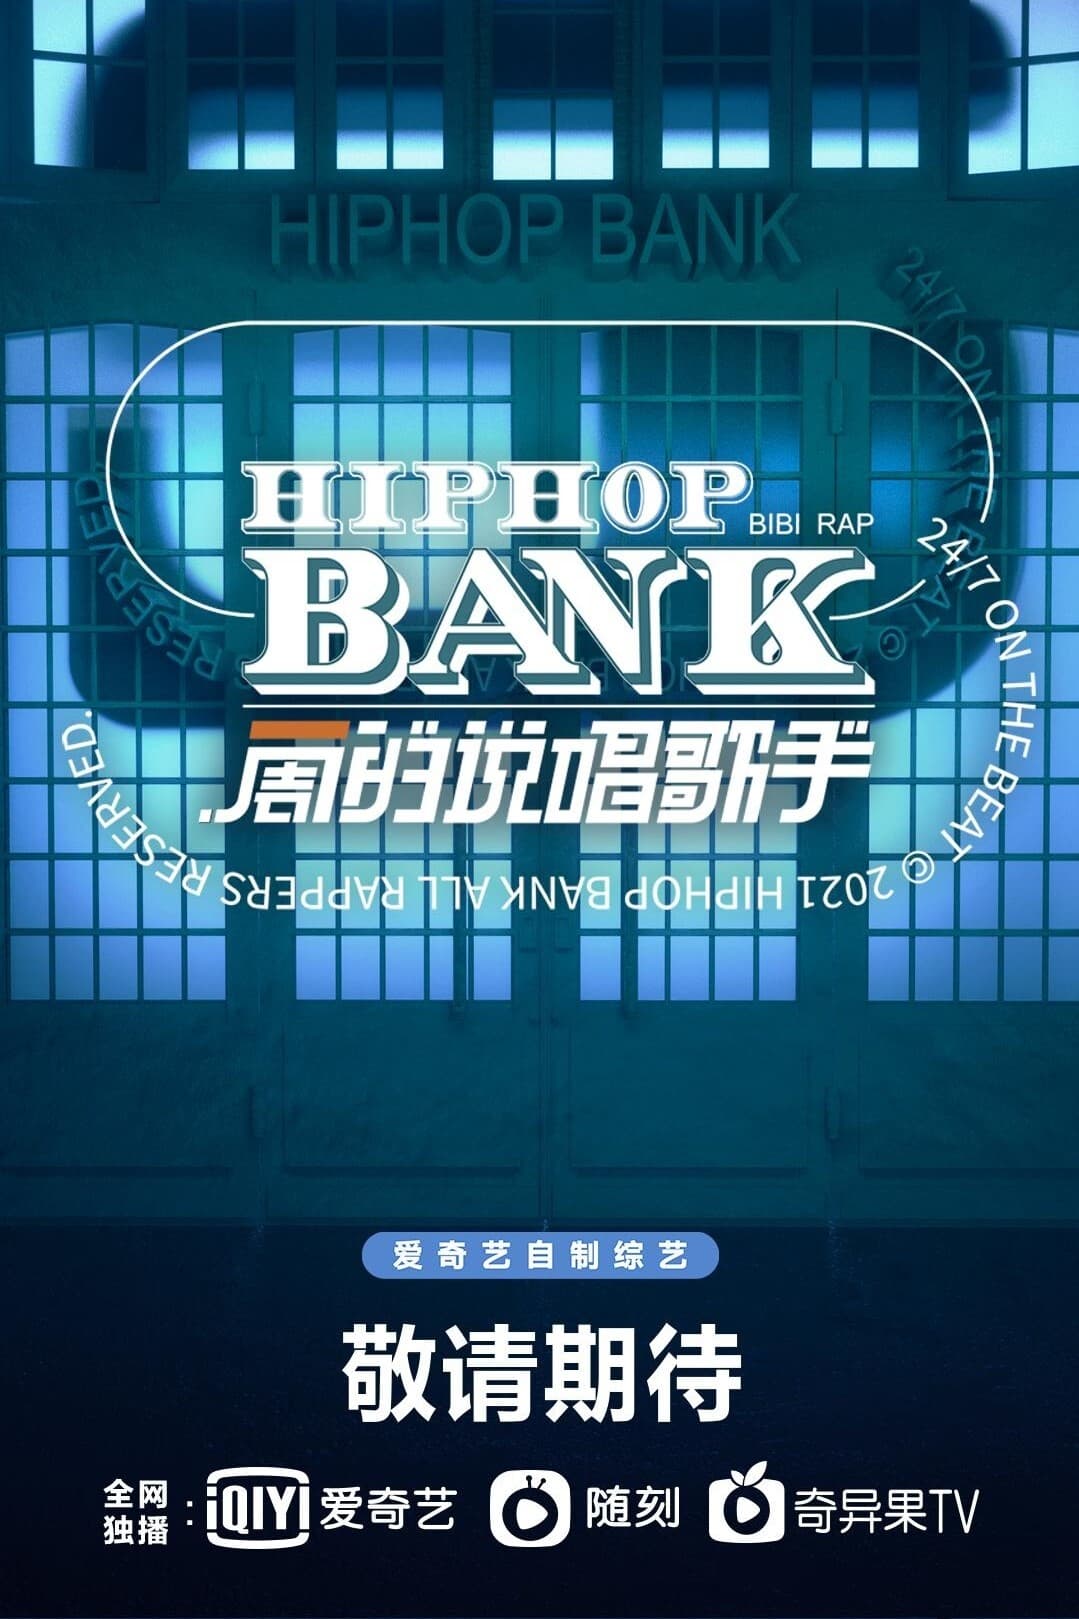 TV ratings for HipHop Bank (一周的说唱歌手) in South Africa. iqiyi TV series